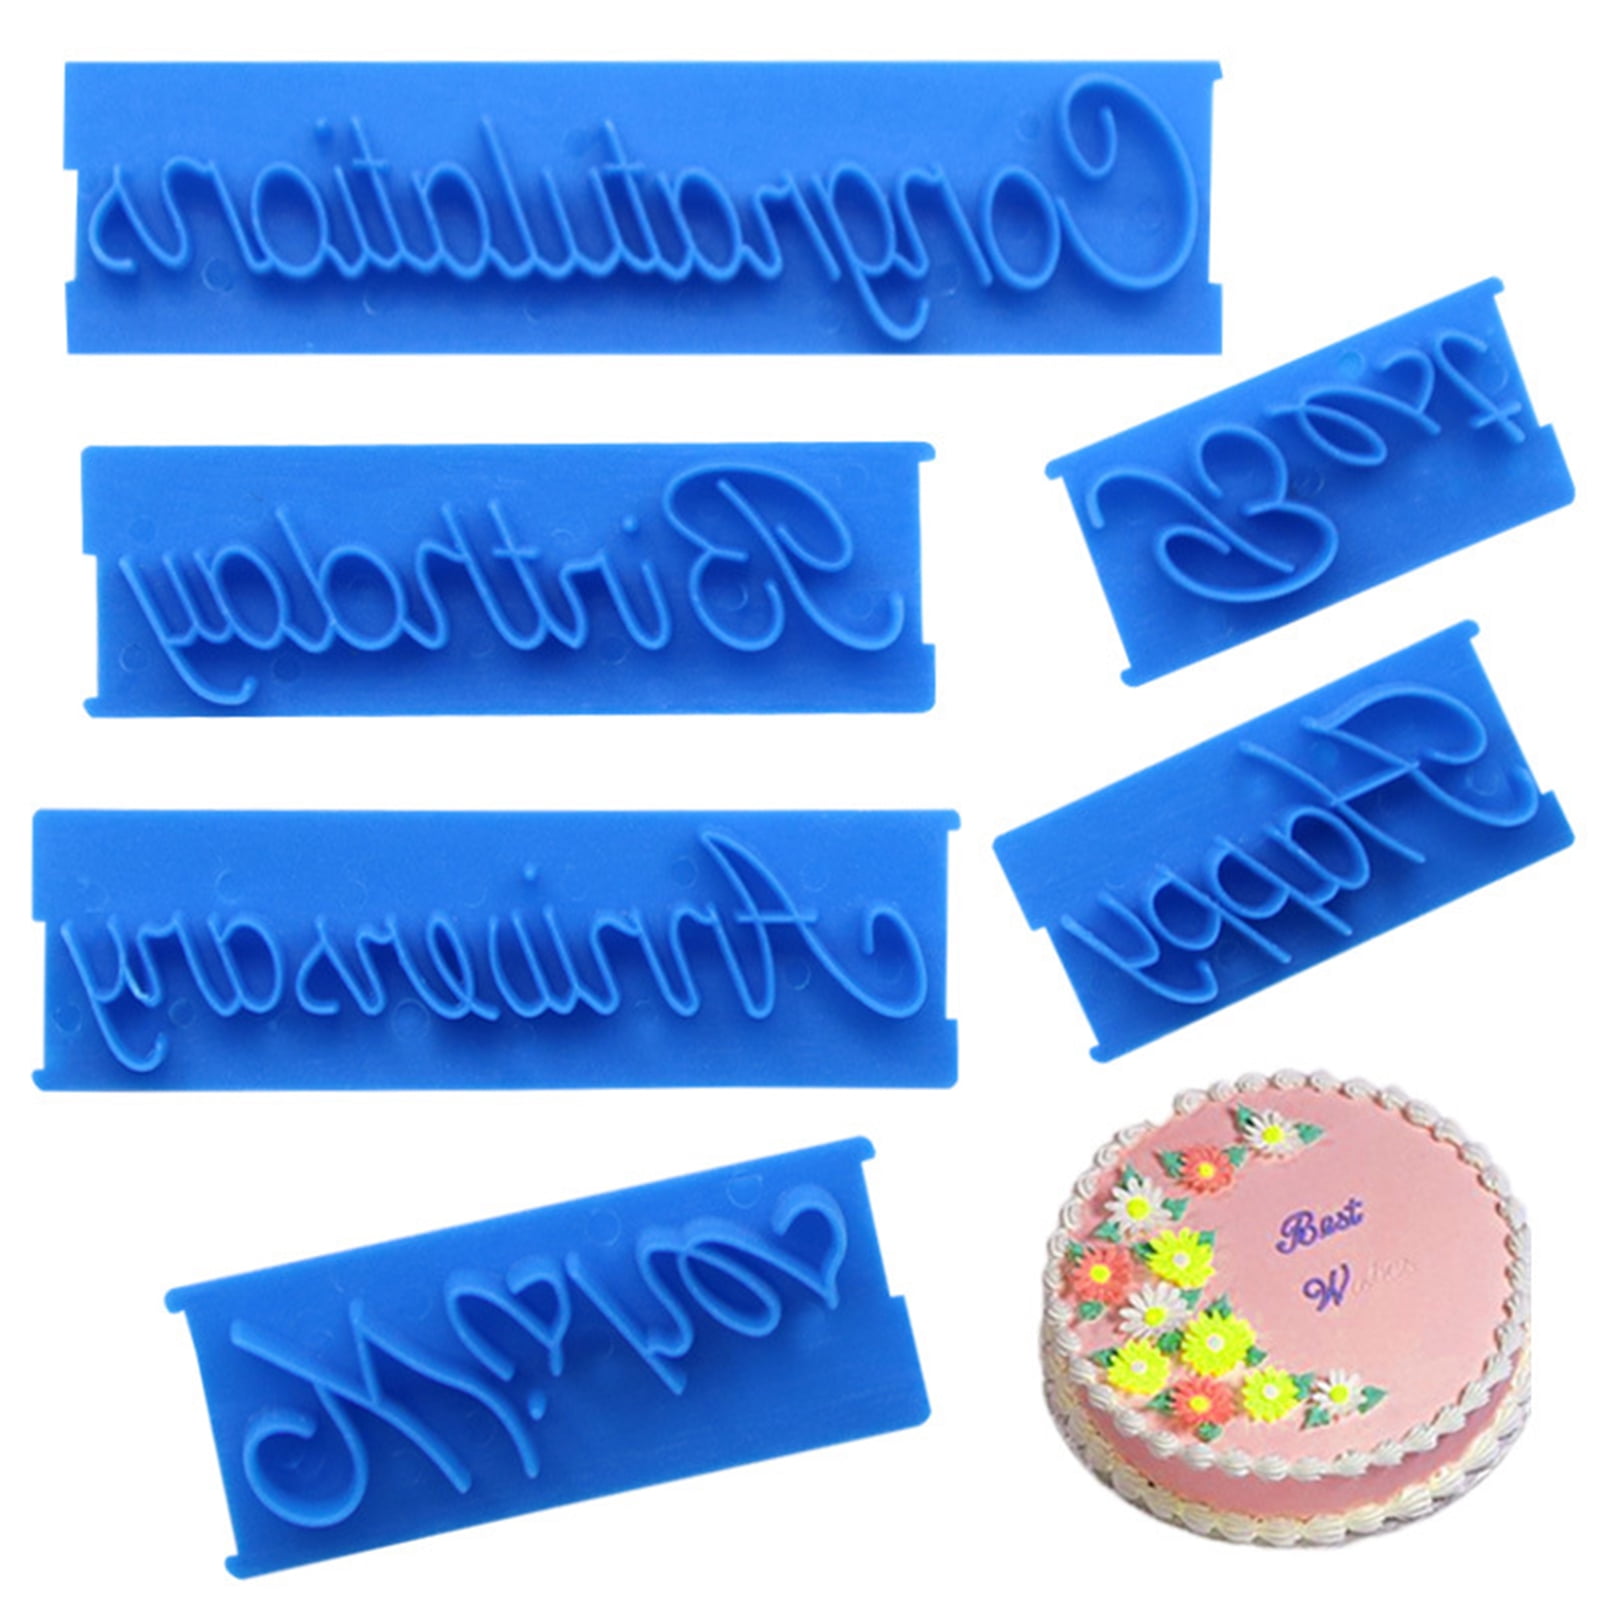 Edible sugarpaste letters - cake topper + yellow/blue + 12 stars